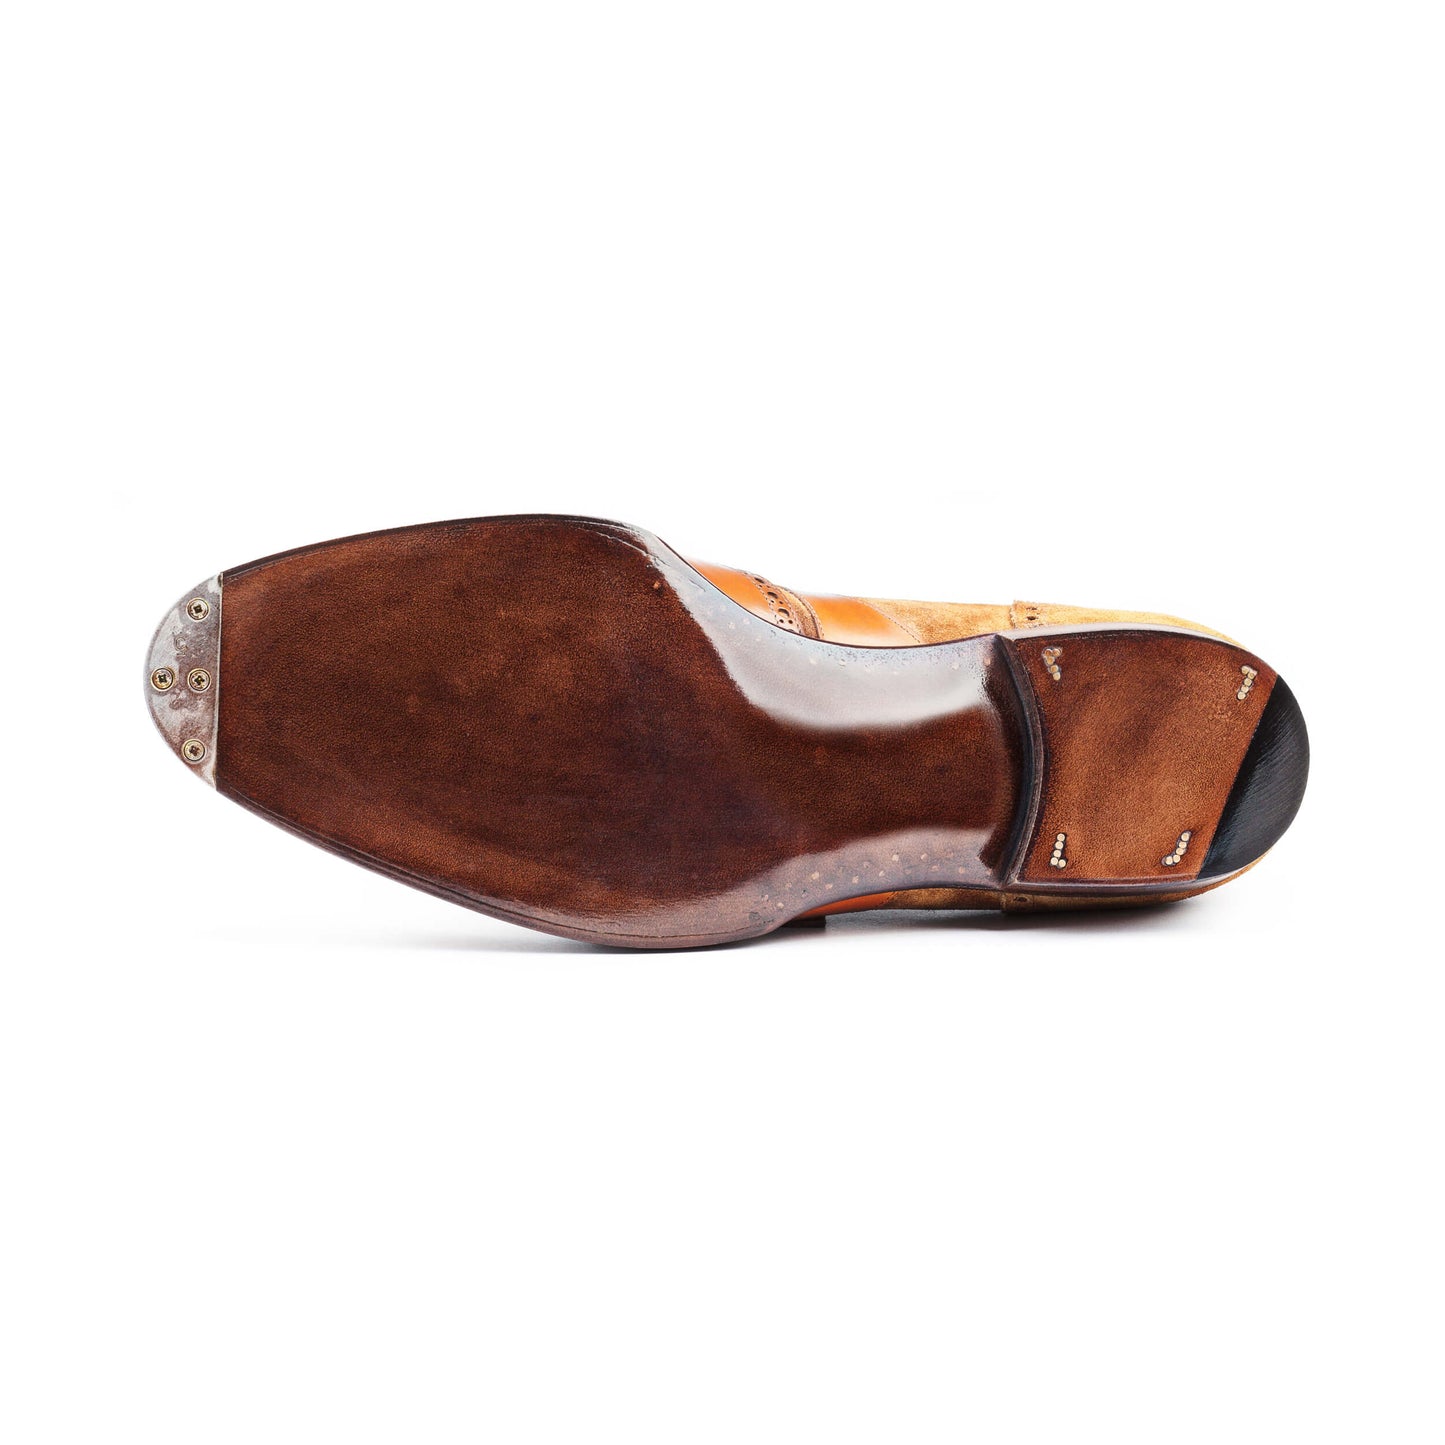 Dress loafer with fringy strap and buckle, metal tips included